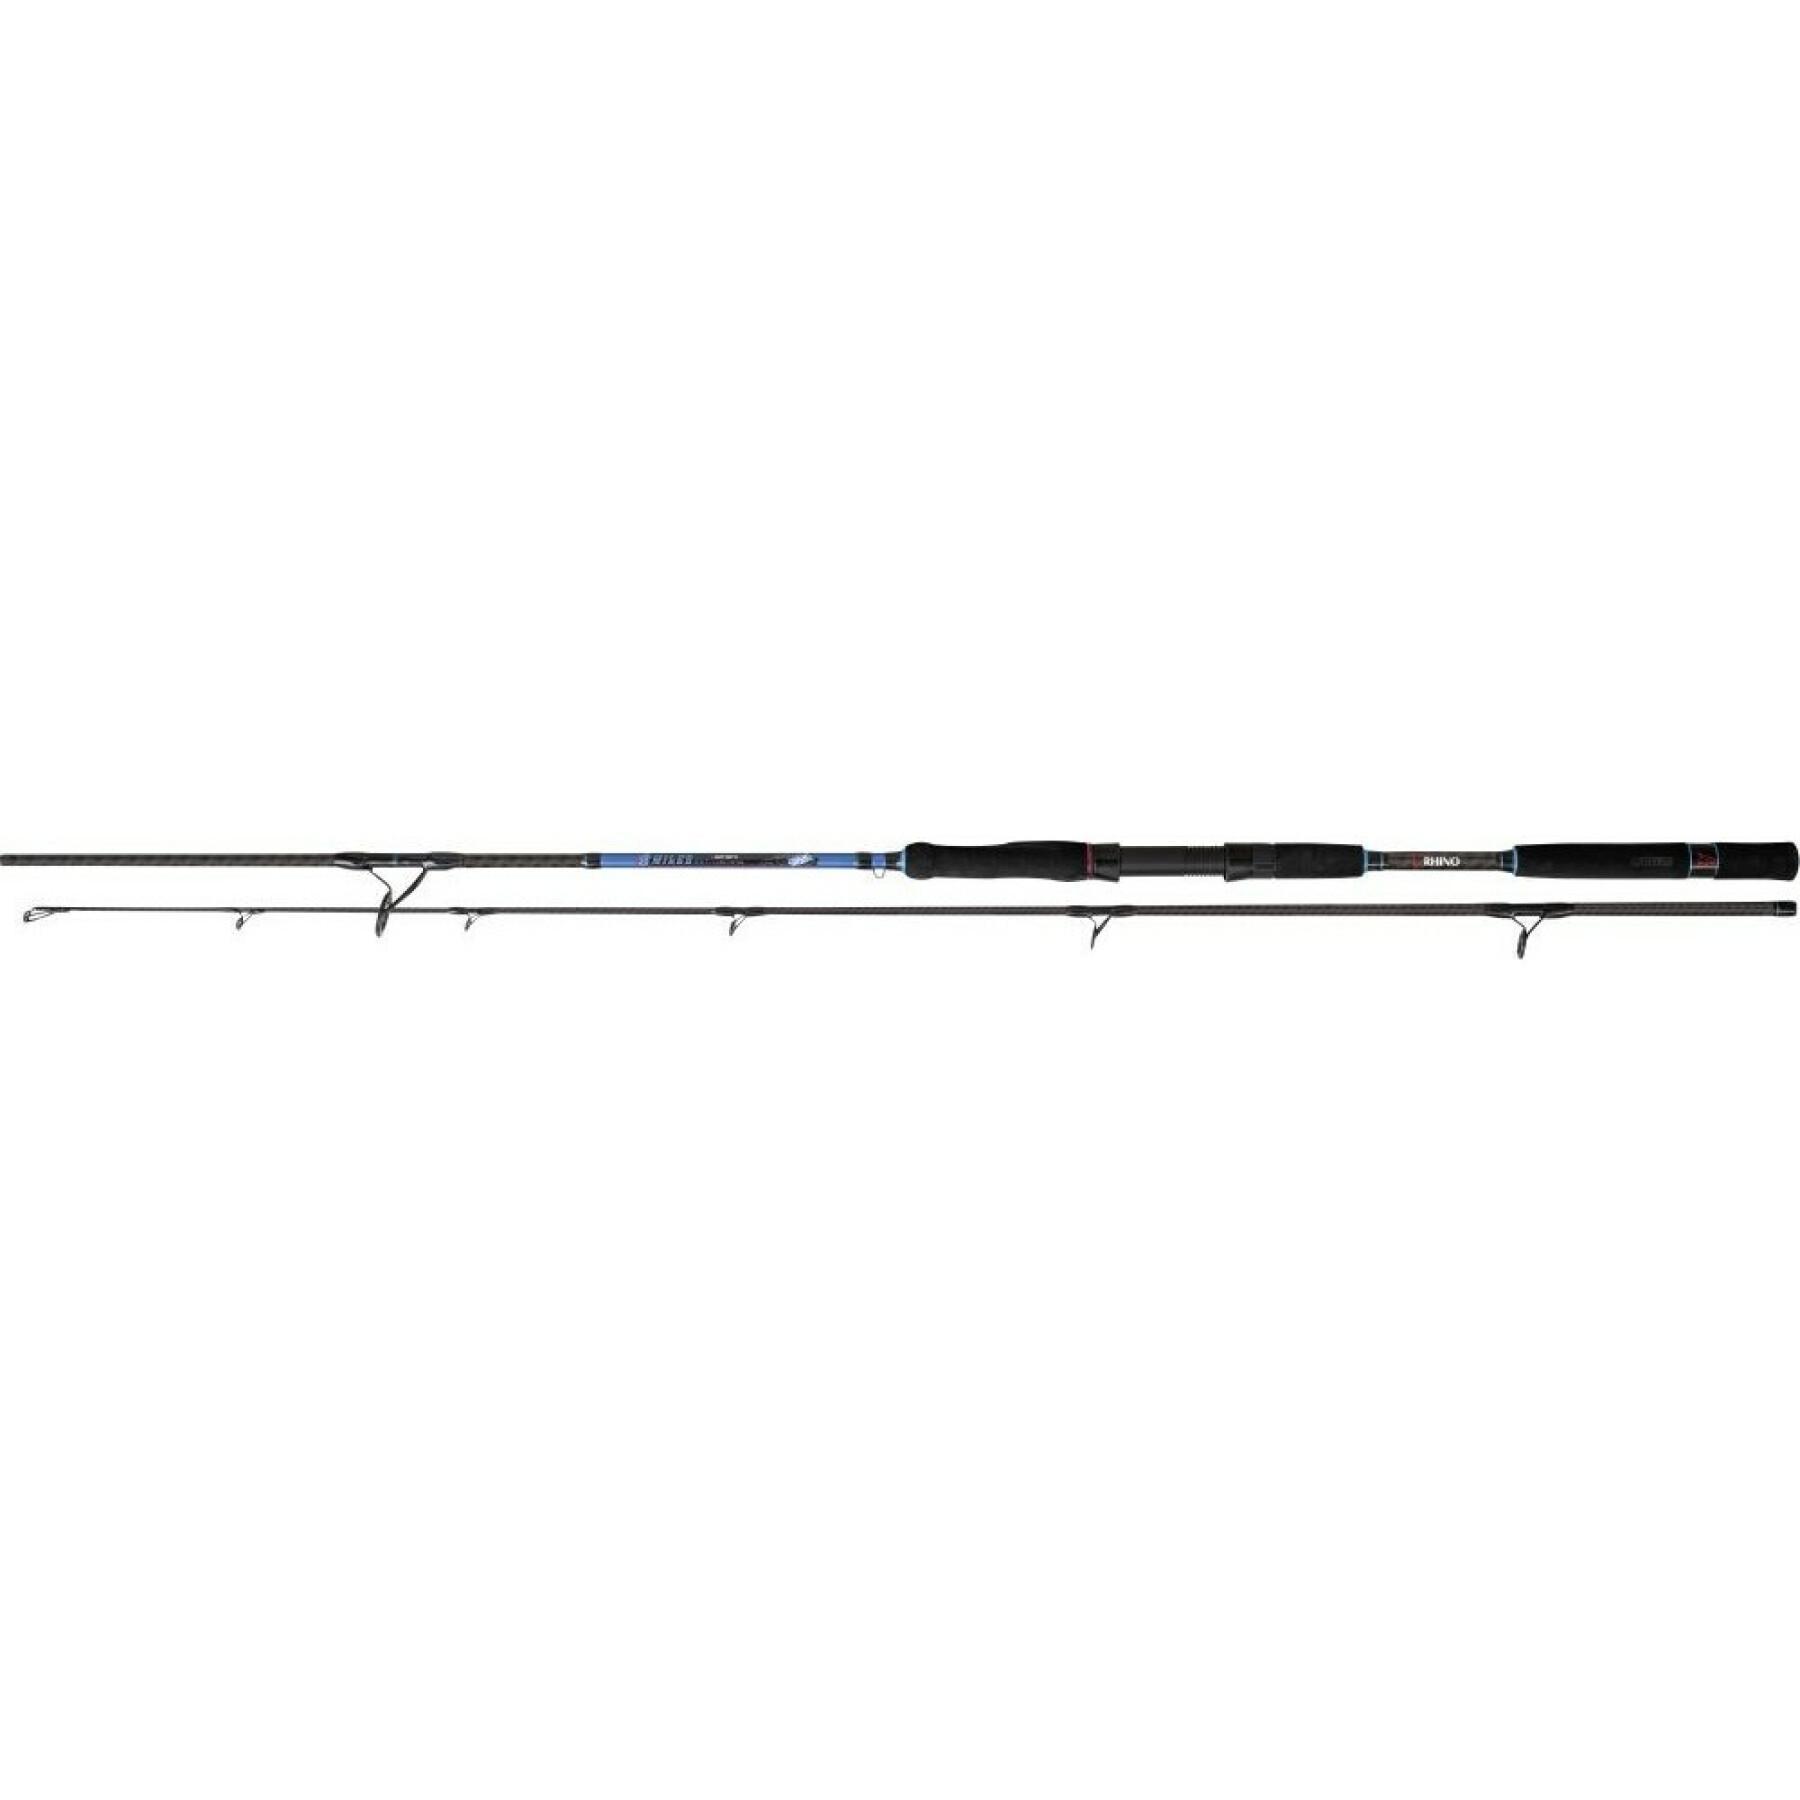 Cane Rhino 8 Miles Out Boat Cast M 165g